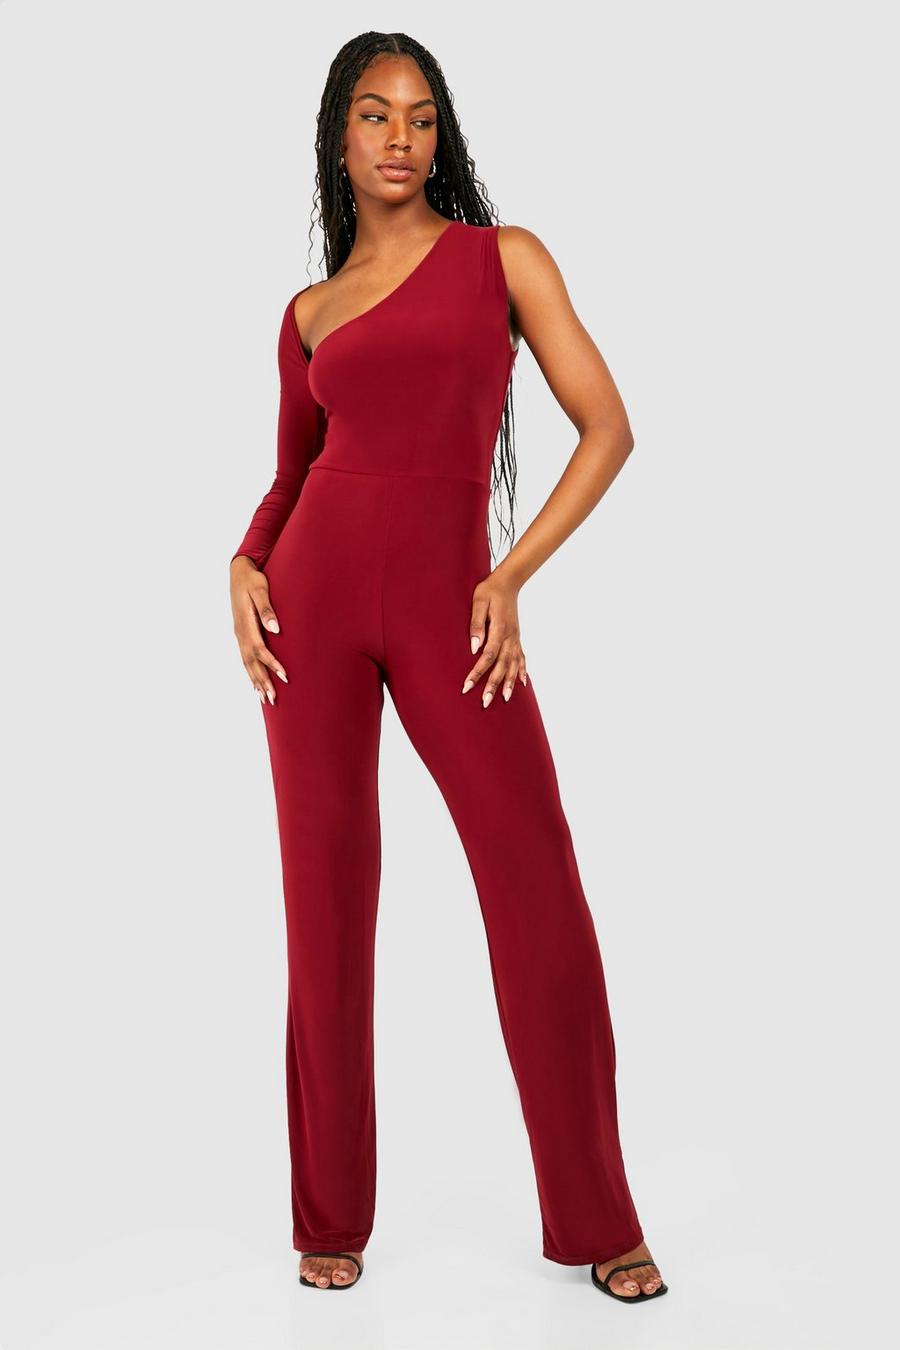 Red Rompers and Jumpsuits for Women Collection of Abdominal